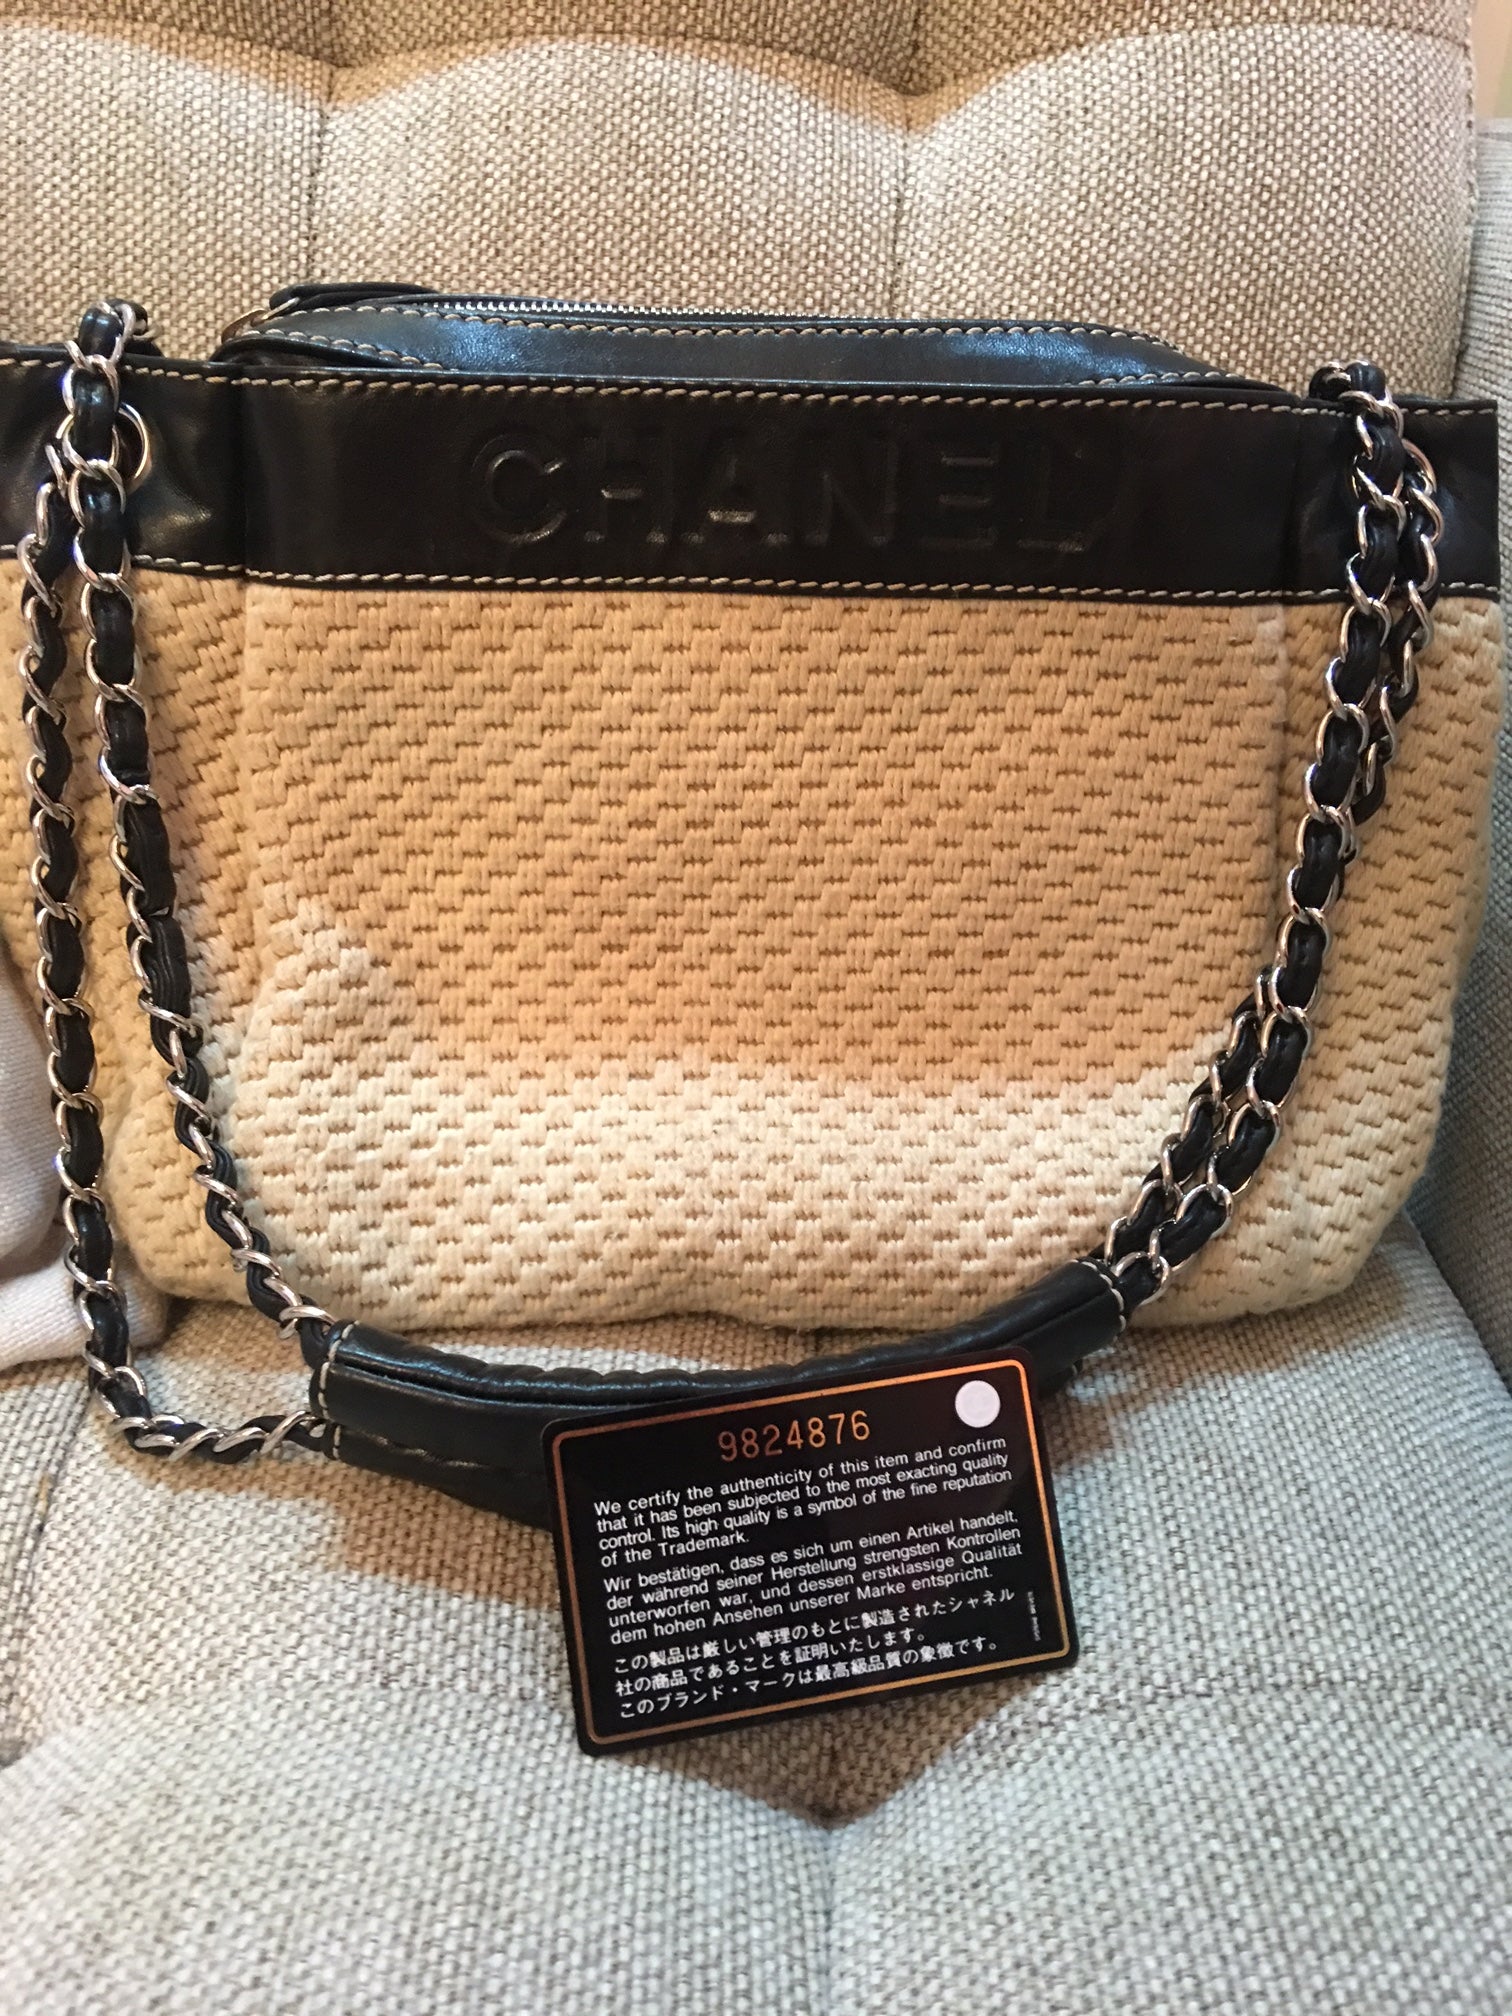 Vintage Chanel Bags, Pre-owned Chanel Bags